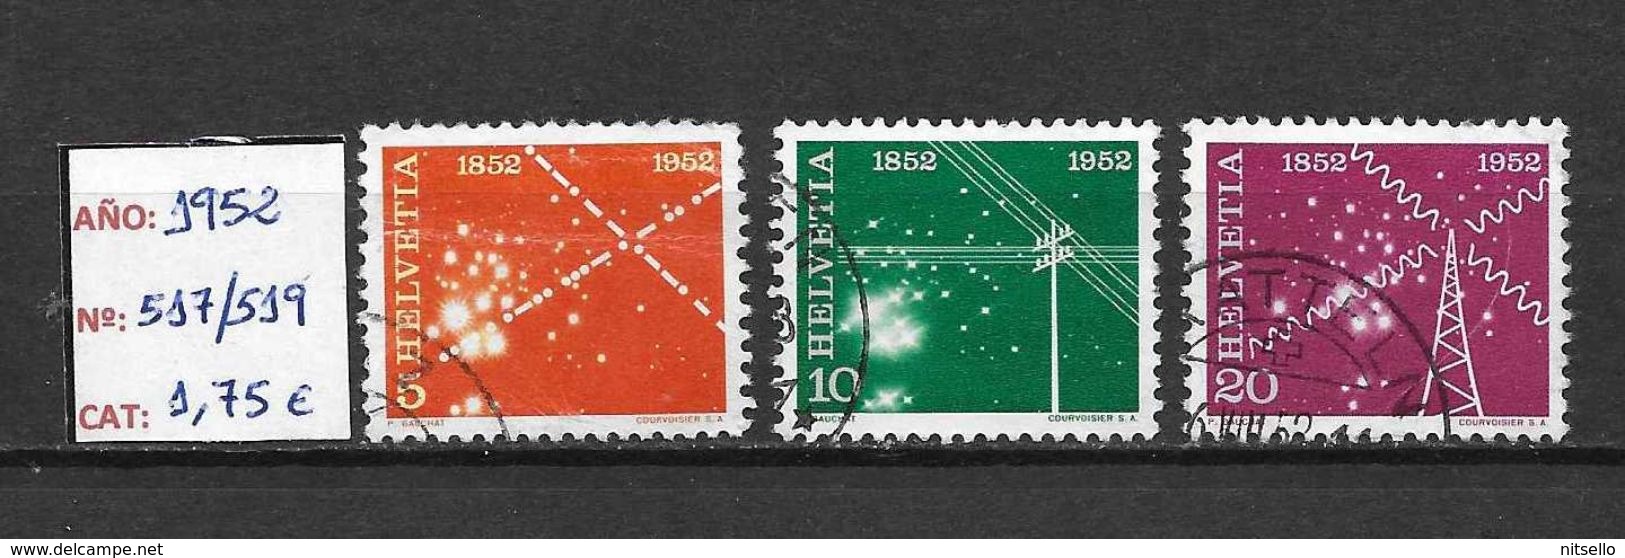 LOTE 1377  ///  SUIZA  1952    YVERT Nº: 517/519   // CATALOG/COTE: 1,75€ - Used Stamps